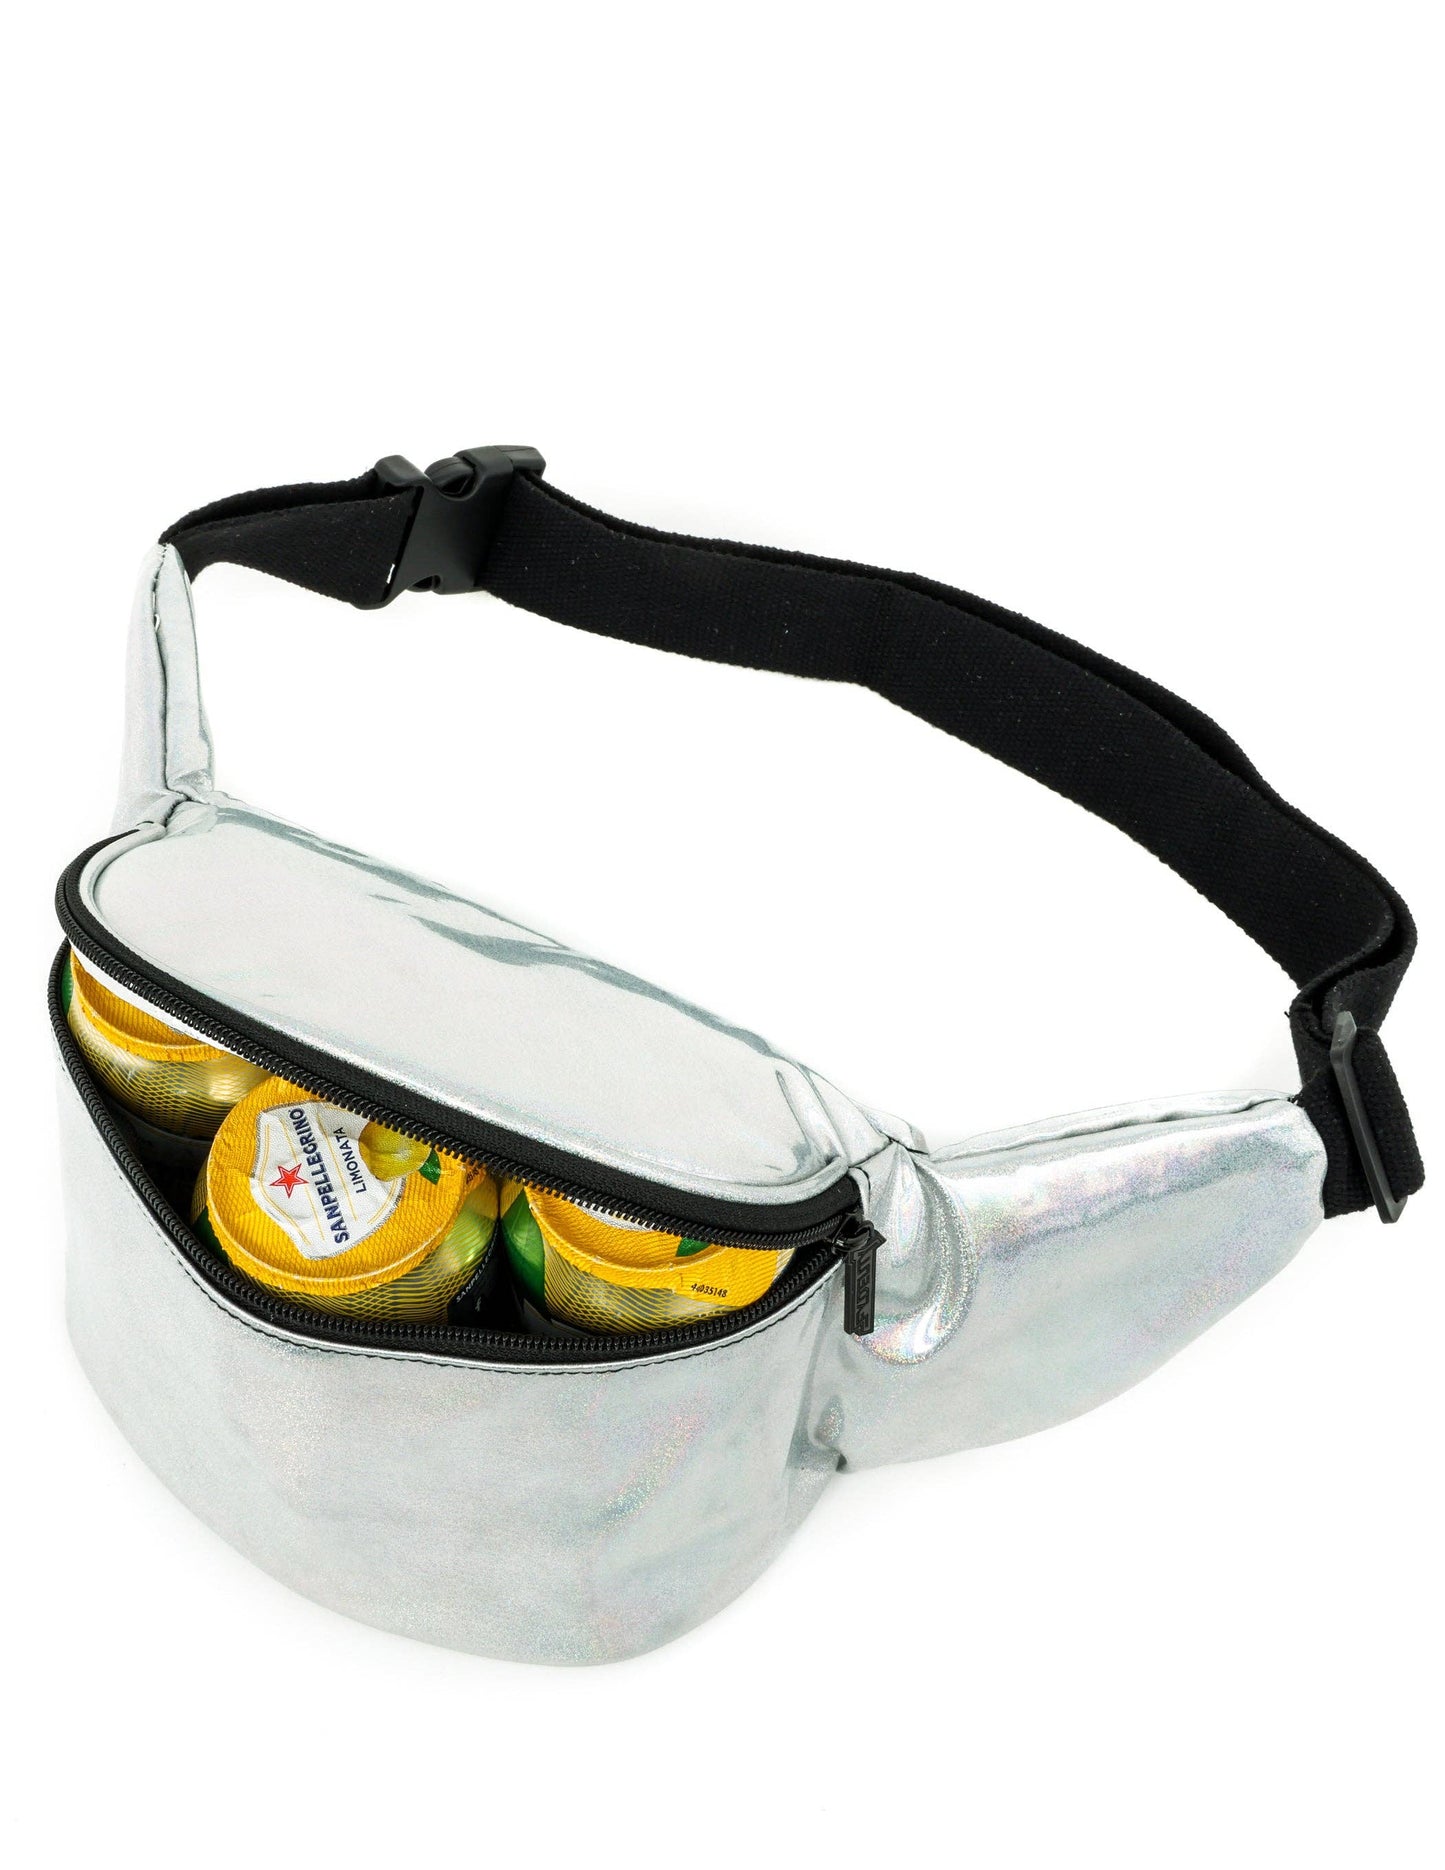 Laser Silver - Old sKOOL Le Freeze Insulated Cooler Fanny Pack